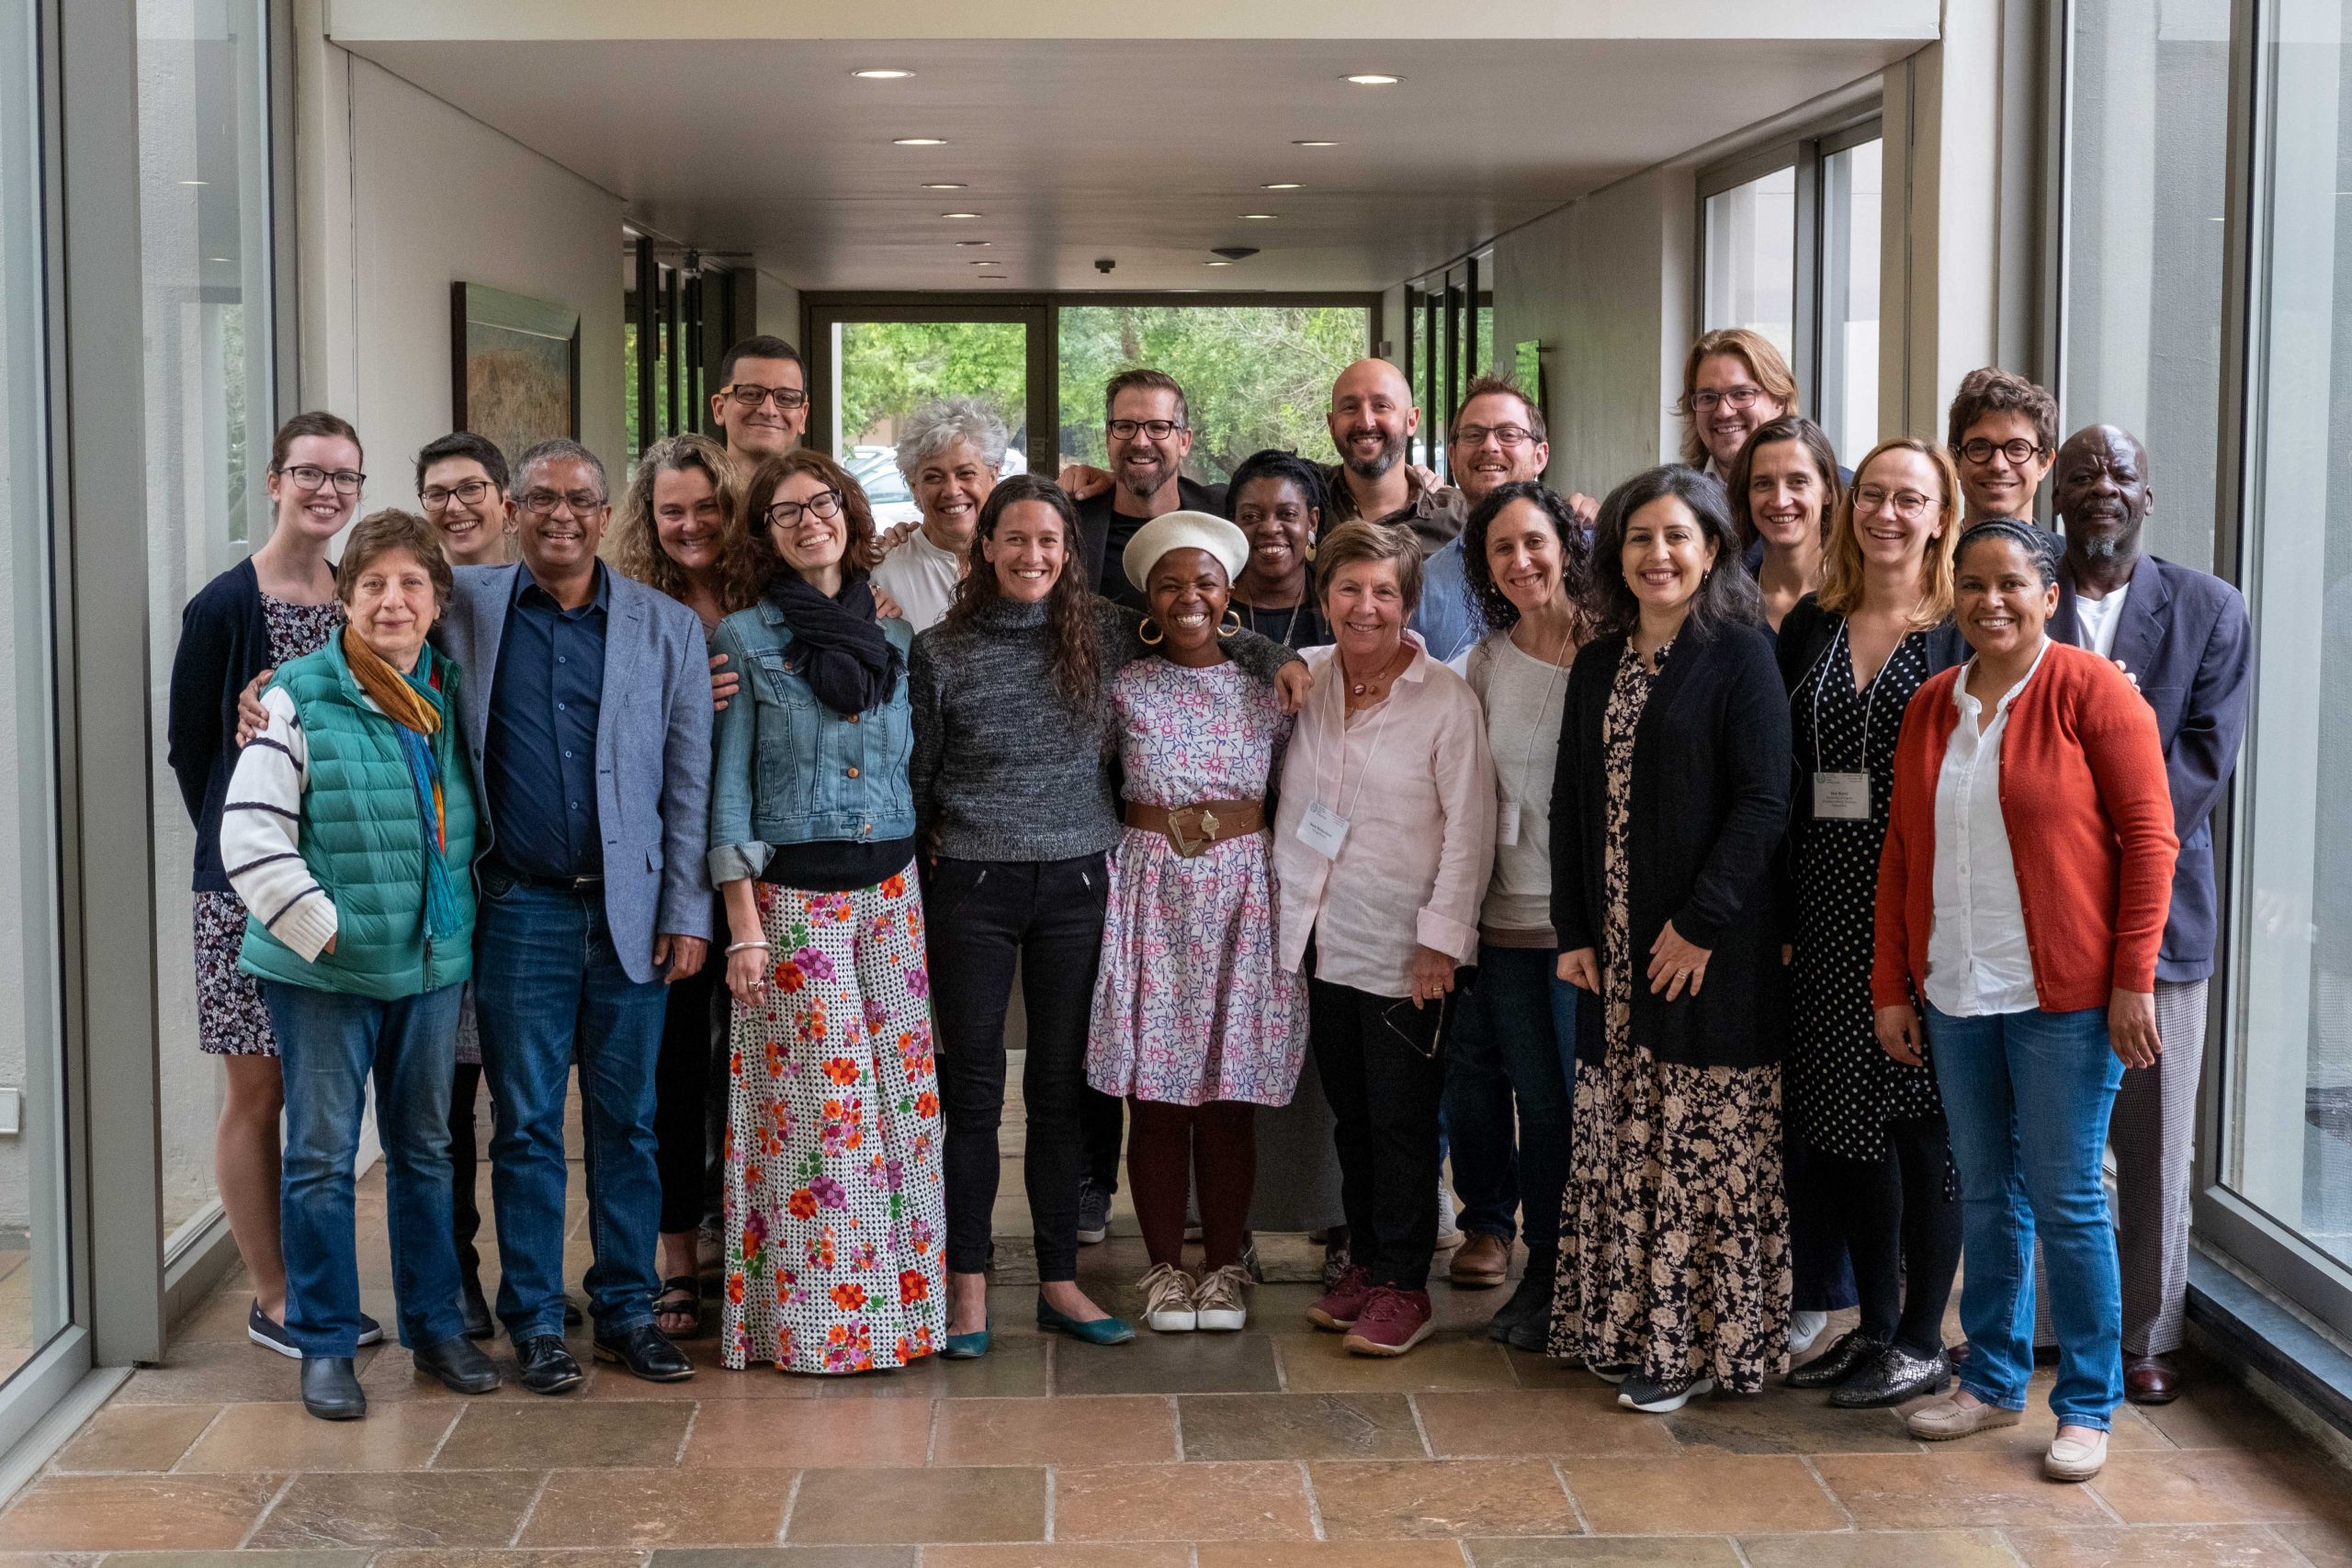 Group photo taken at the Facing History and Ourselves 2019 Summit in South Africa.